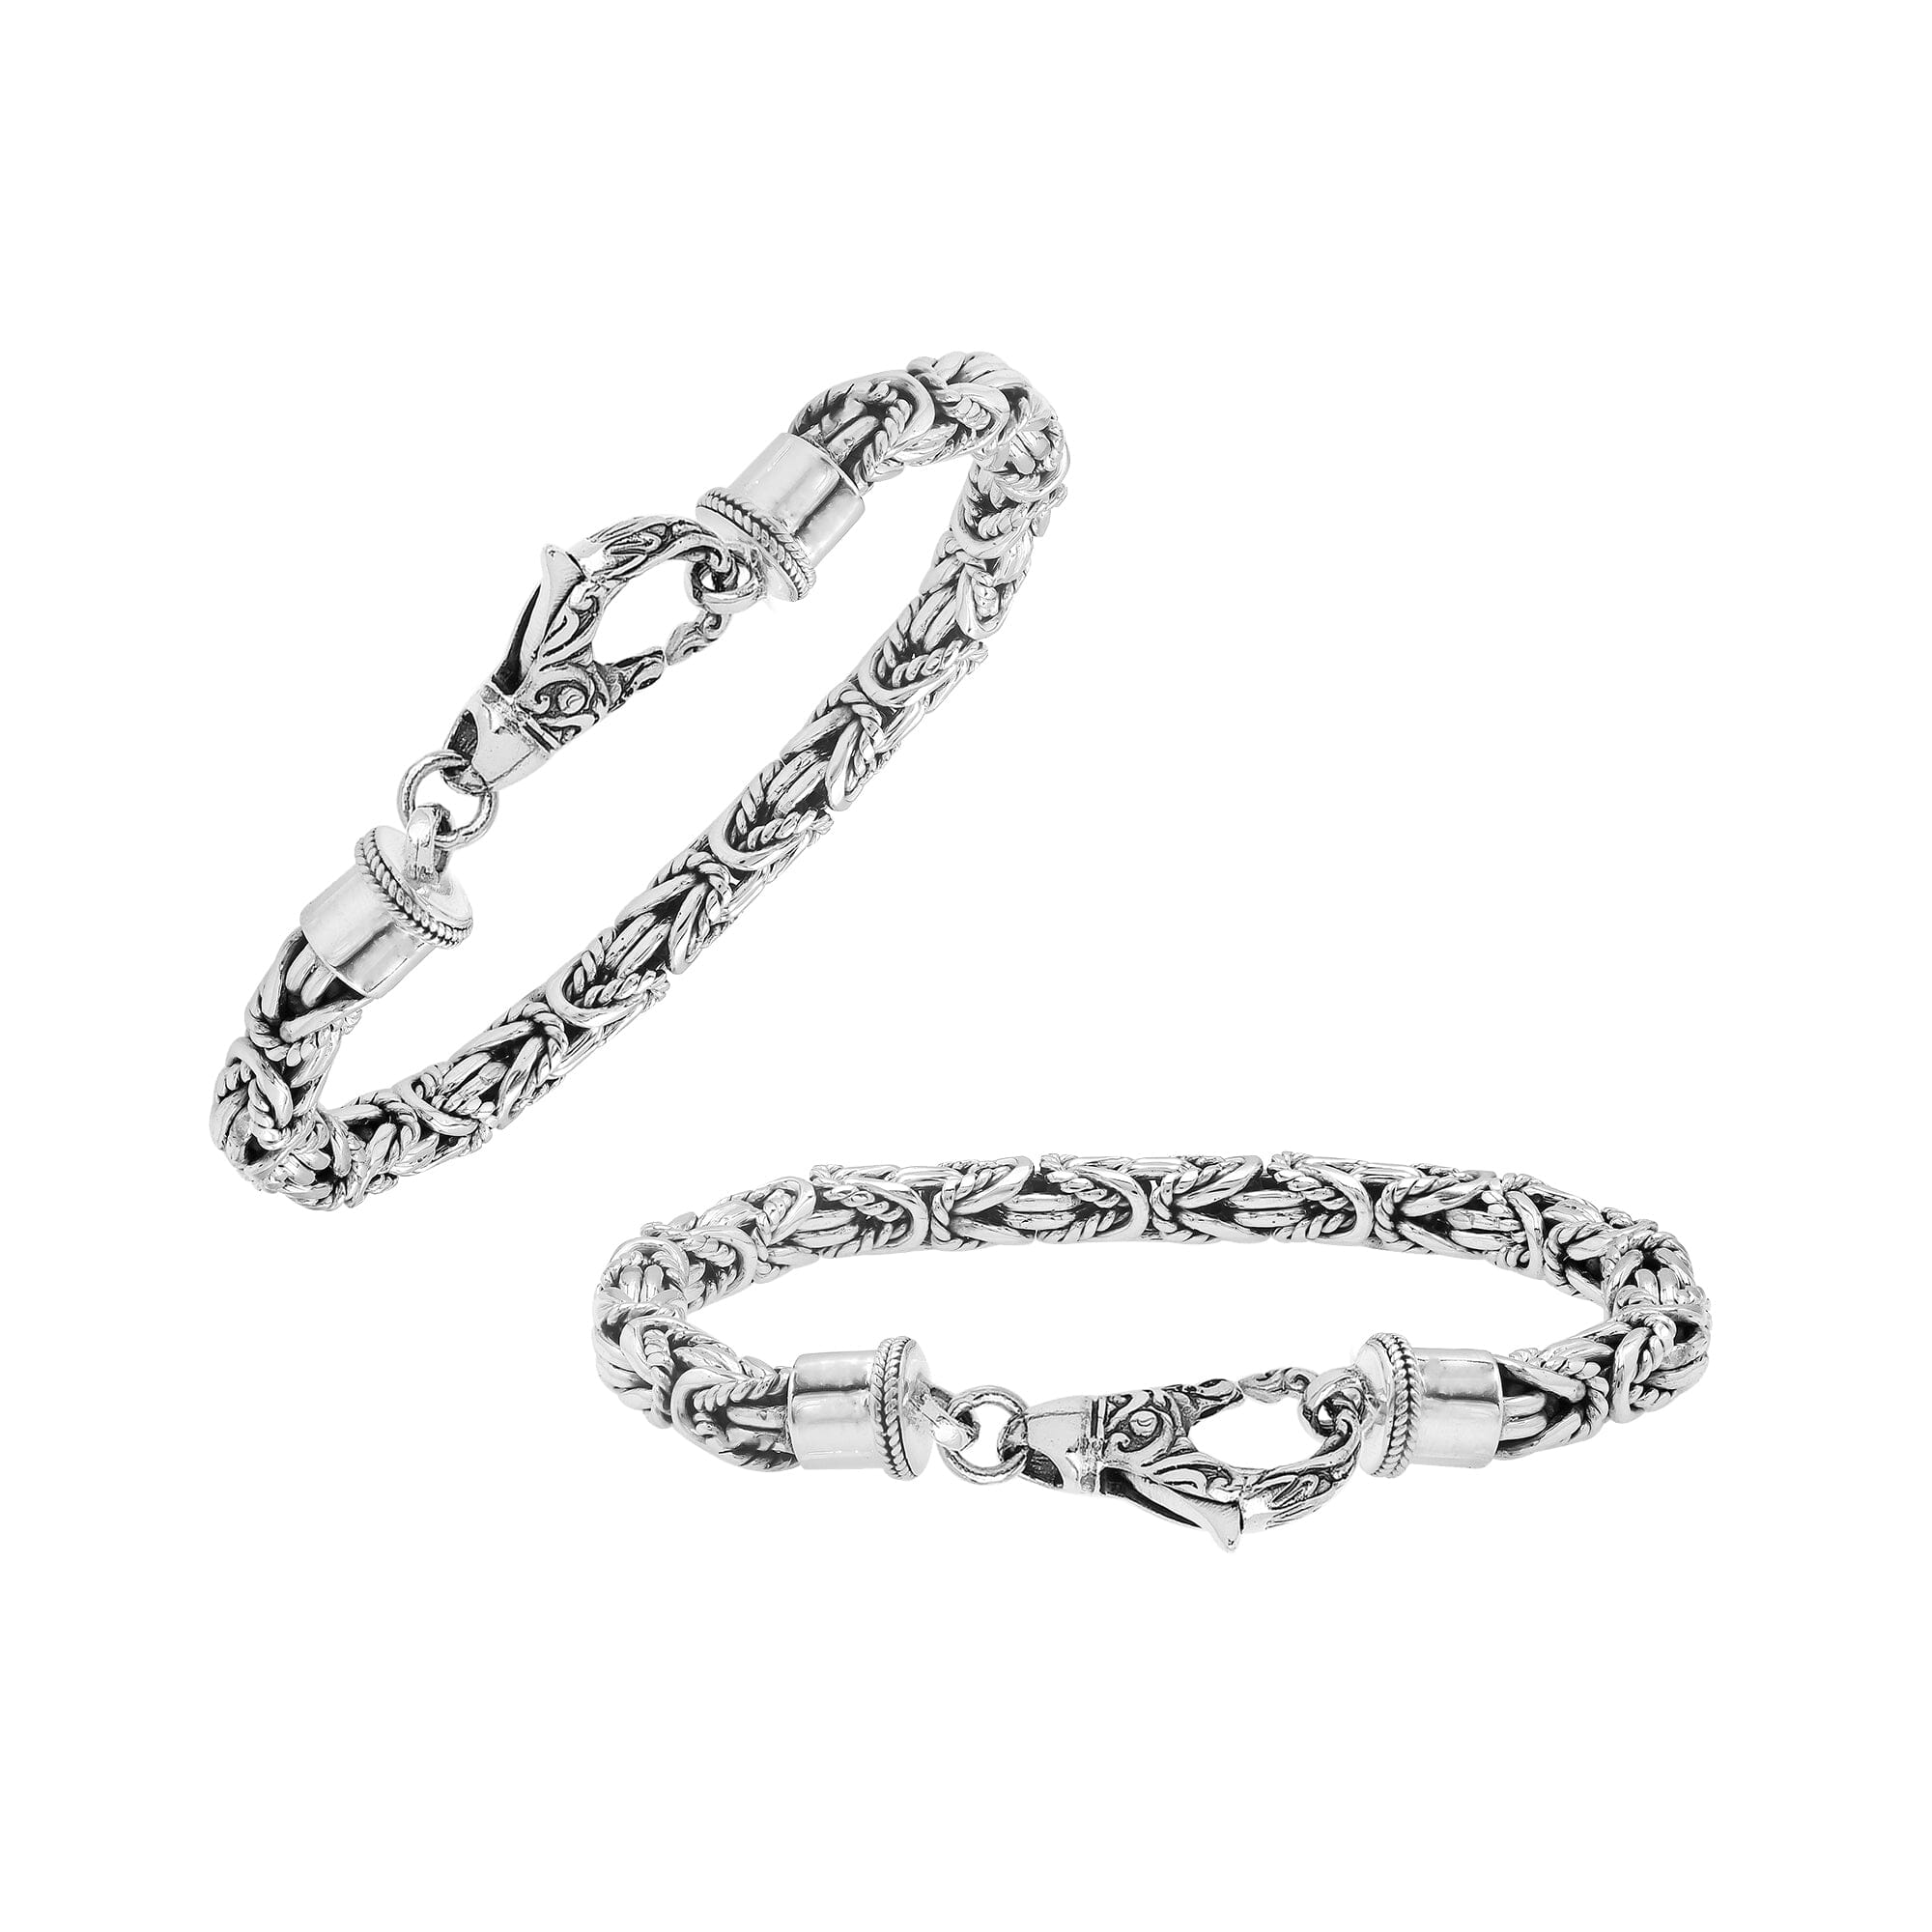 Buy Silver-Toned Bracelets & Bangles for Women by Youbella Online | Ajio.com